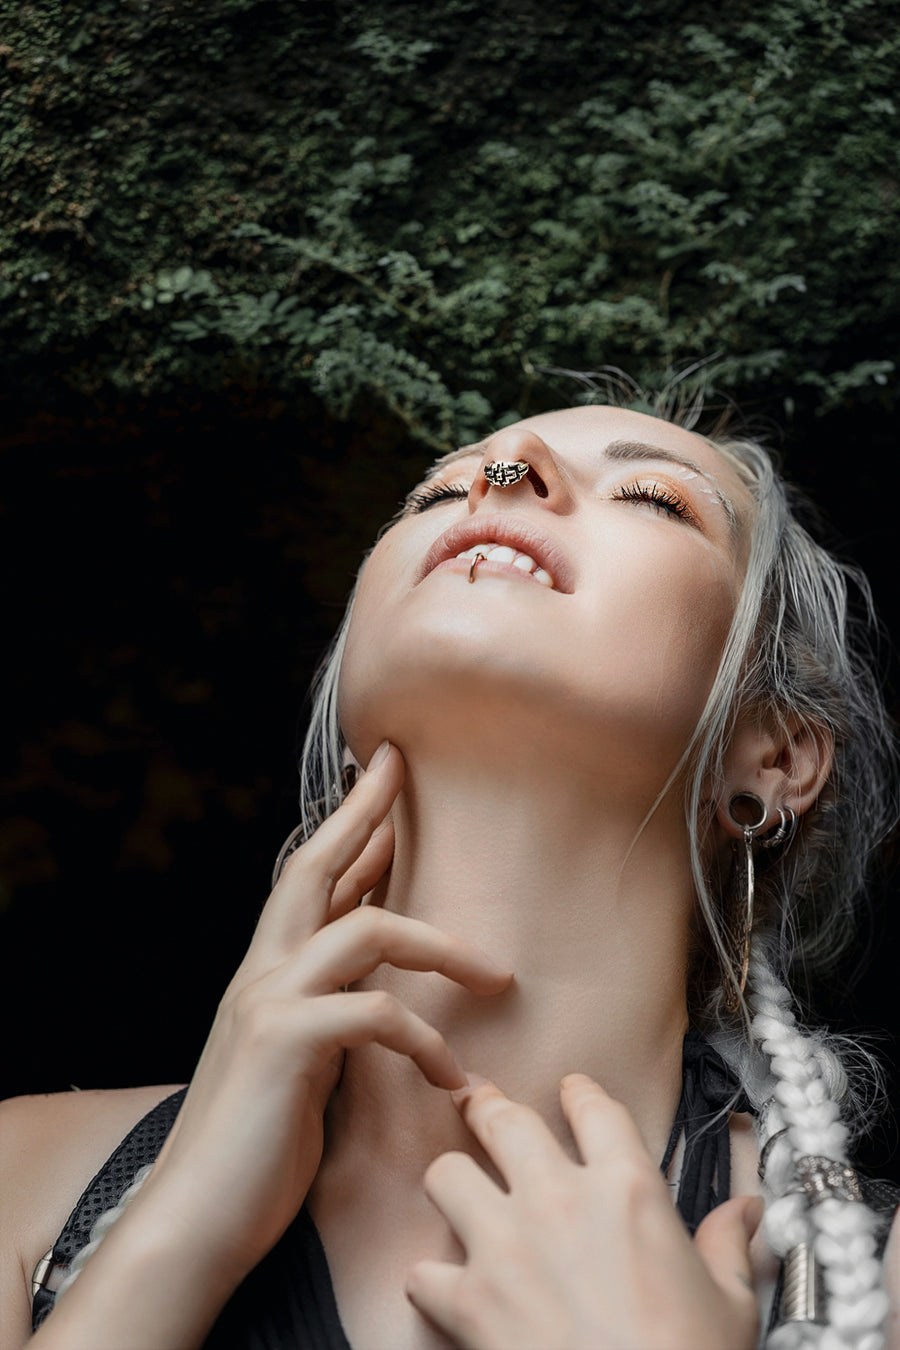 Contemplative woman gazing upward with detailed septum piercing and hoop earring, her hands gently touching her throat in a forest setting, highlighting a serene moment of connection with nature and self-expression through body jewelry.